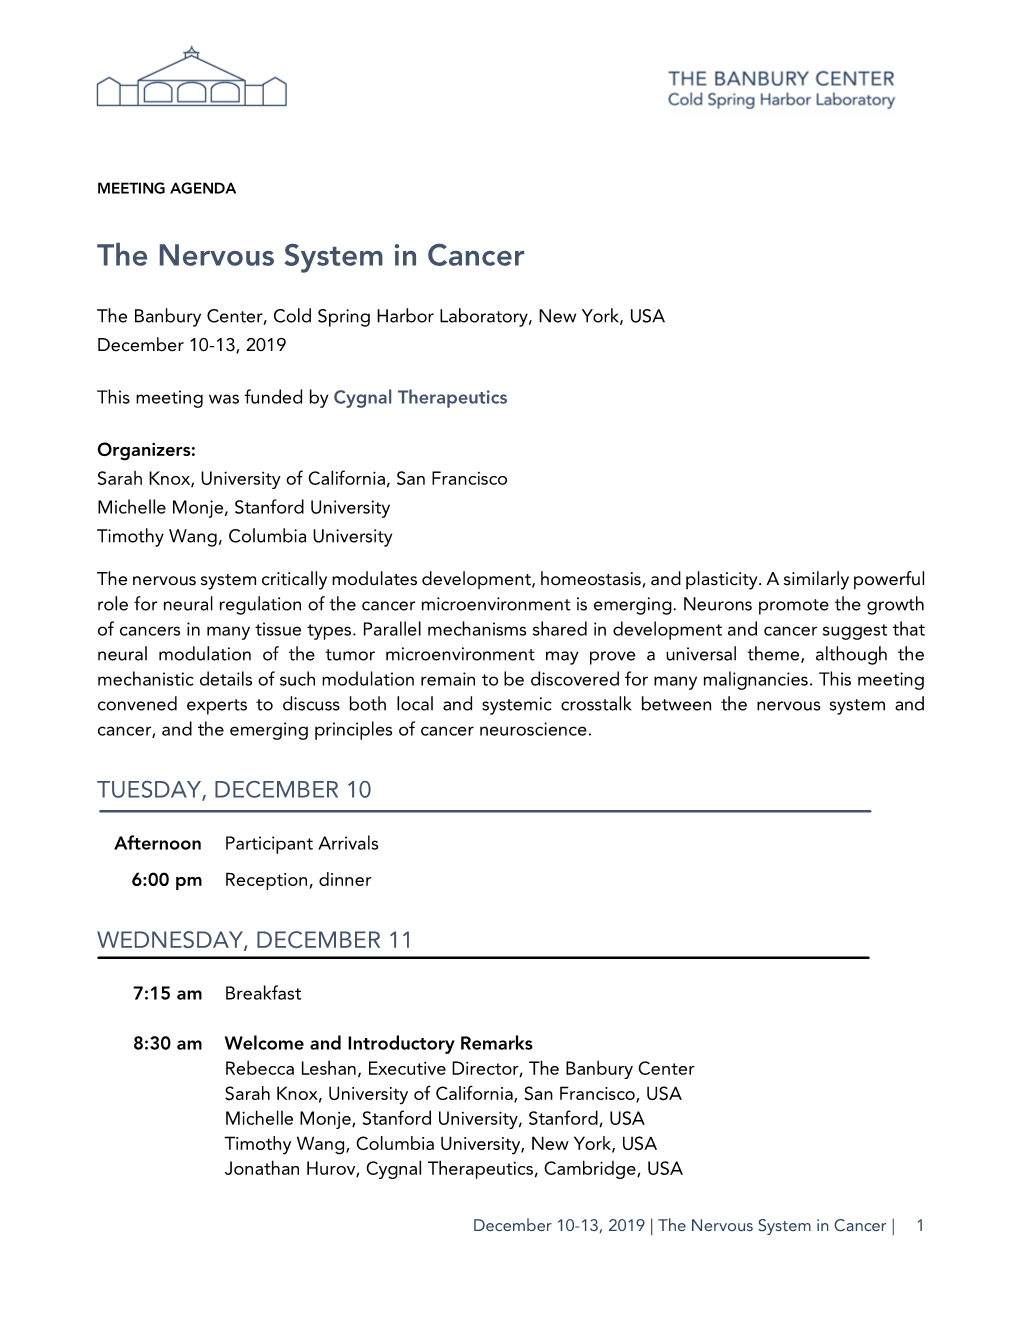 The Nervous System in Cancer